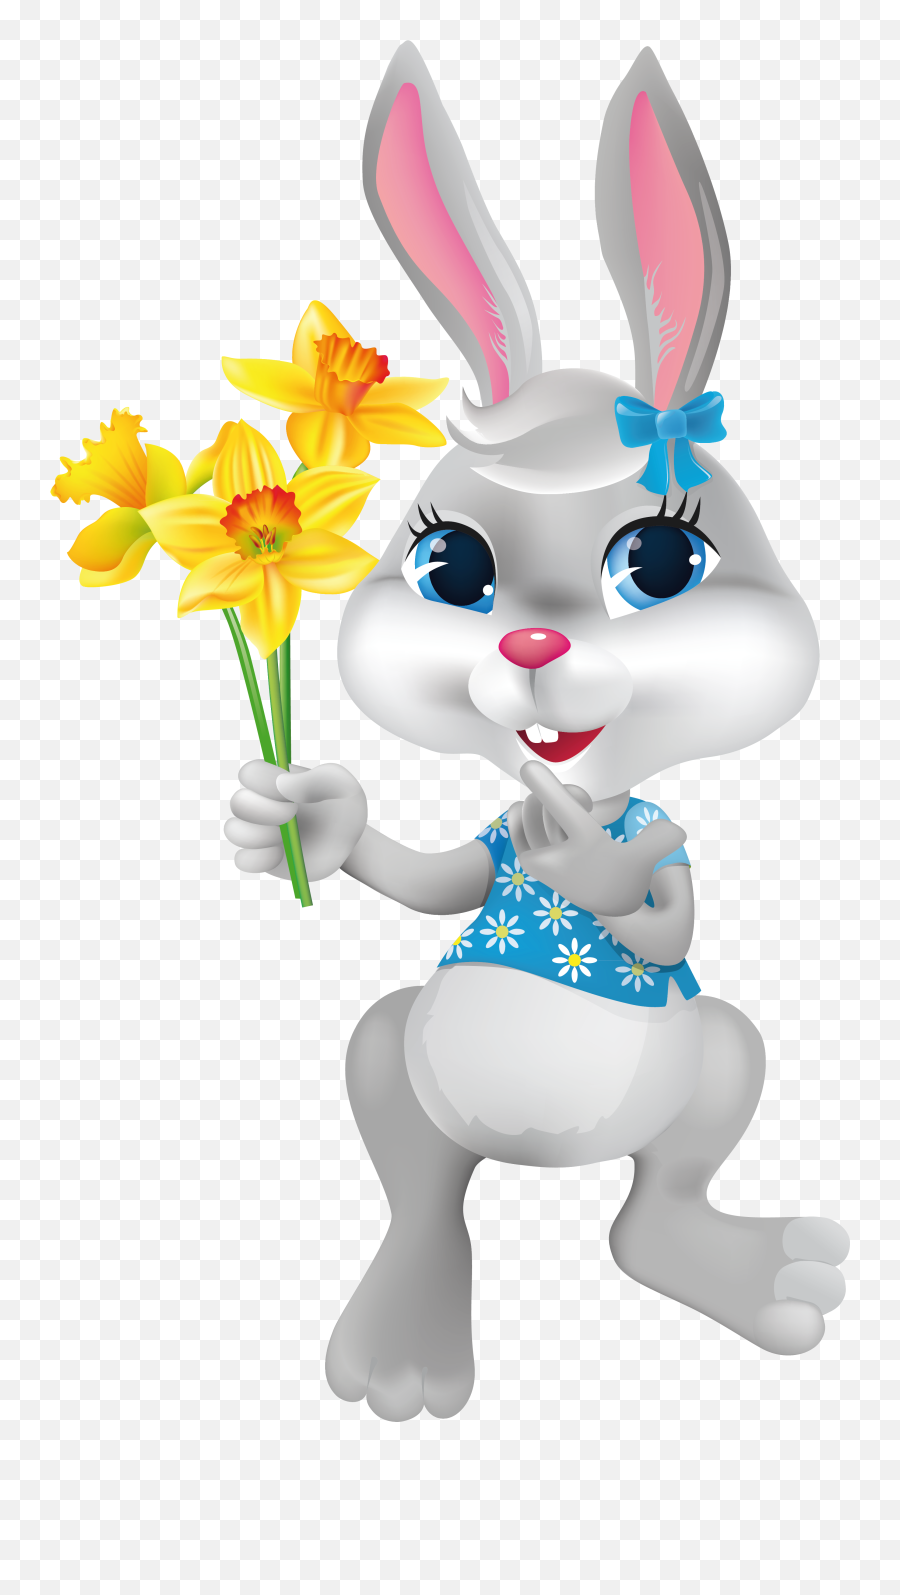 Daffodils Easter Bunny Picture Hq Image - Easter Bunny And Daffodils Emoji,Daffodil Clipart